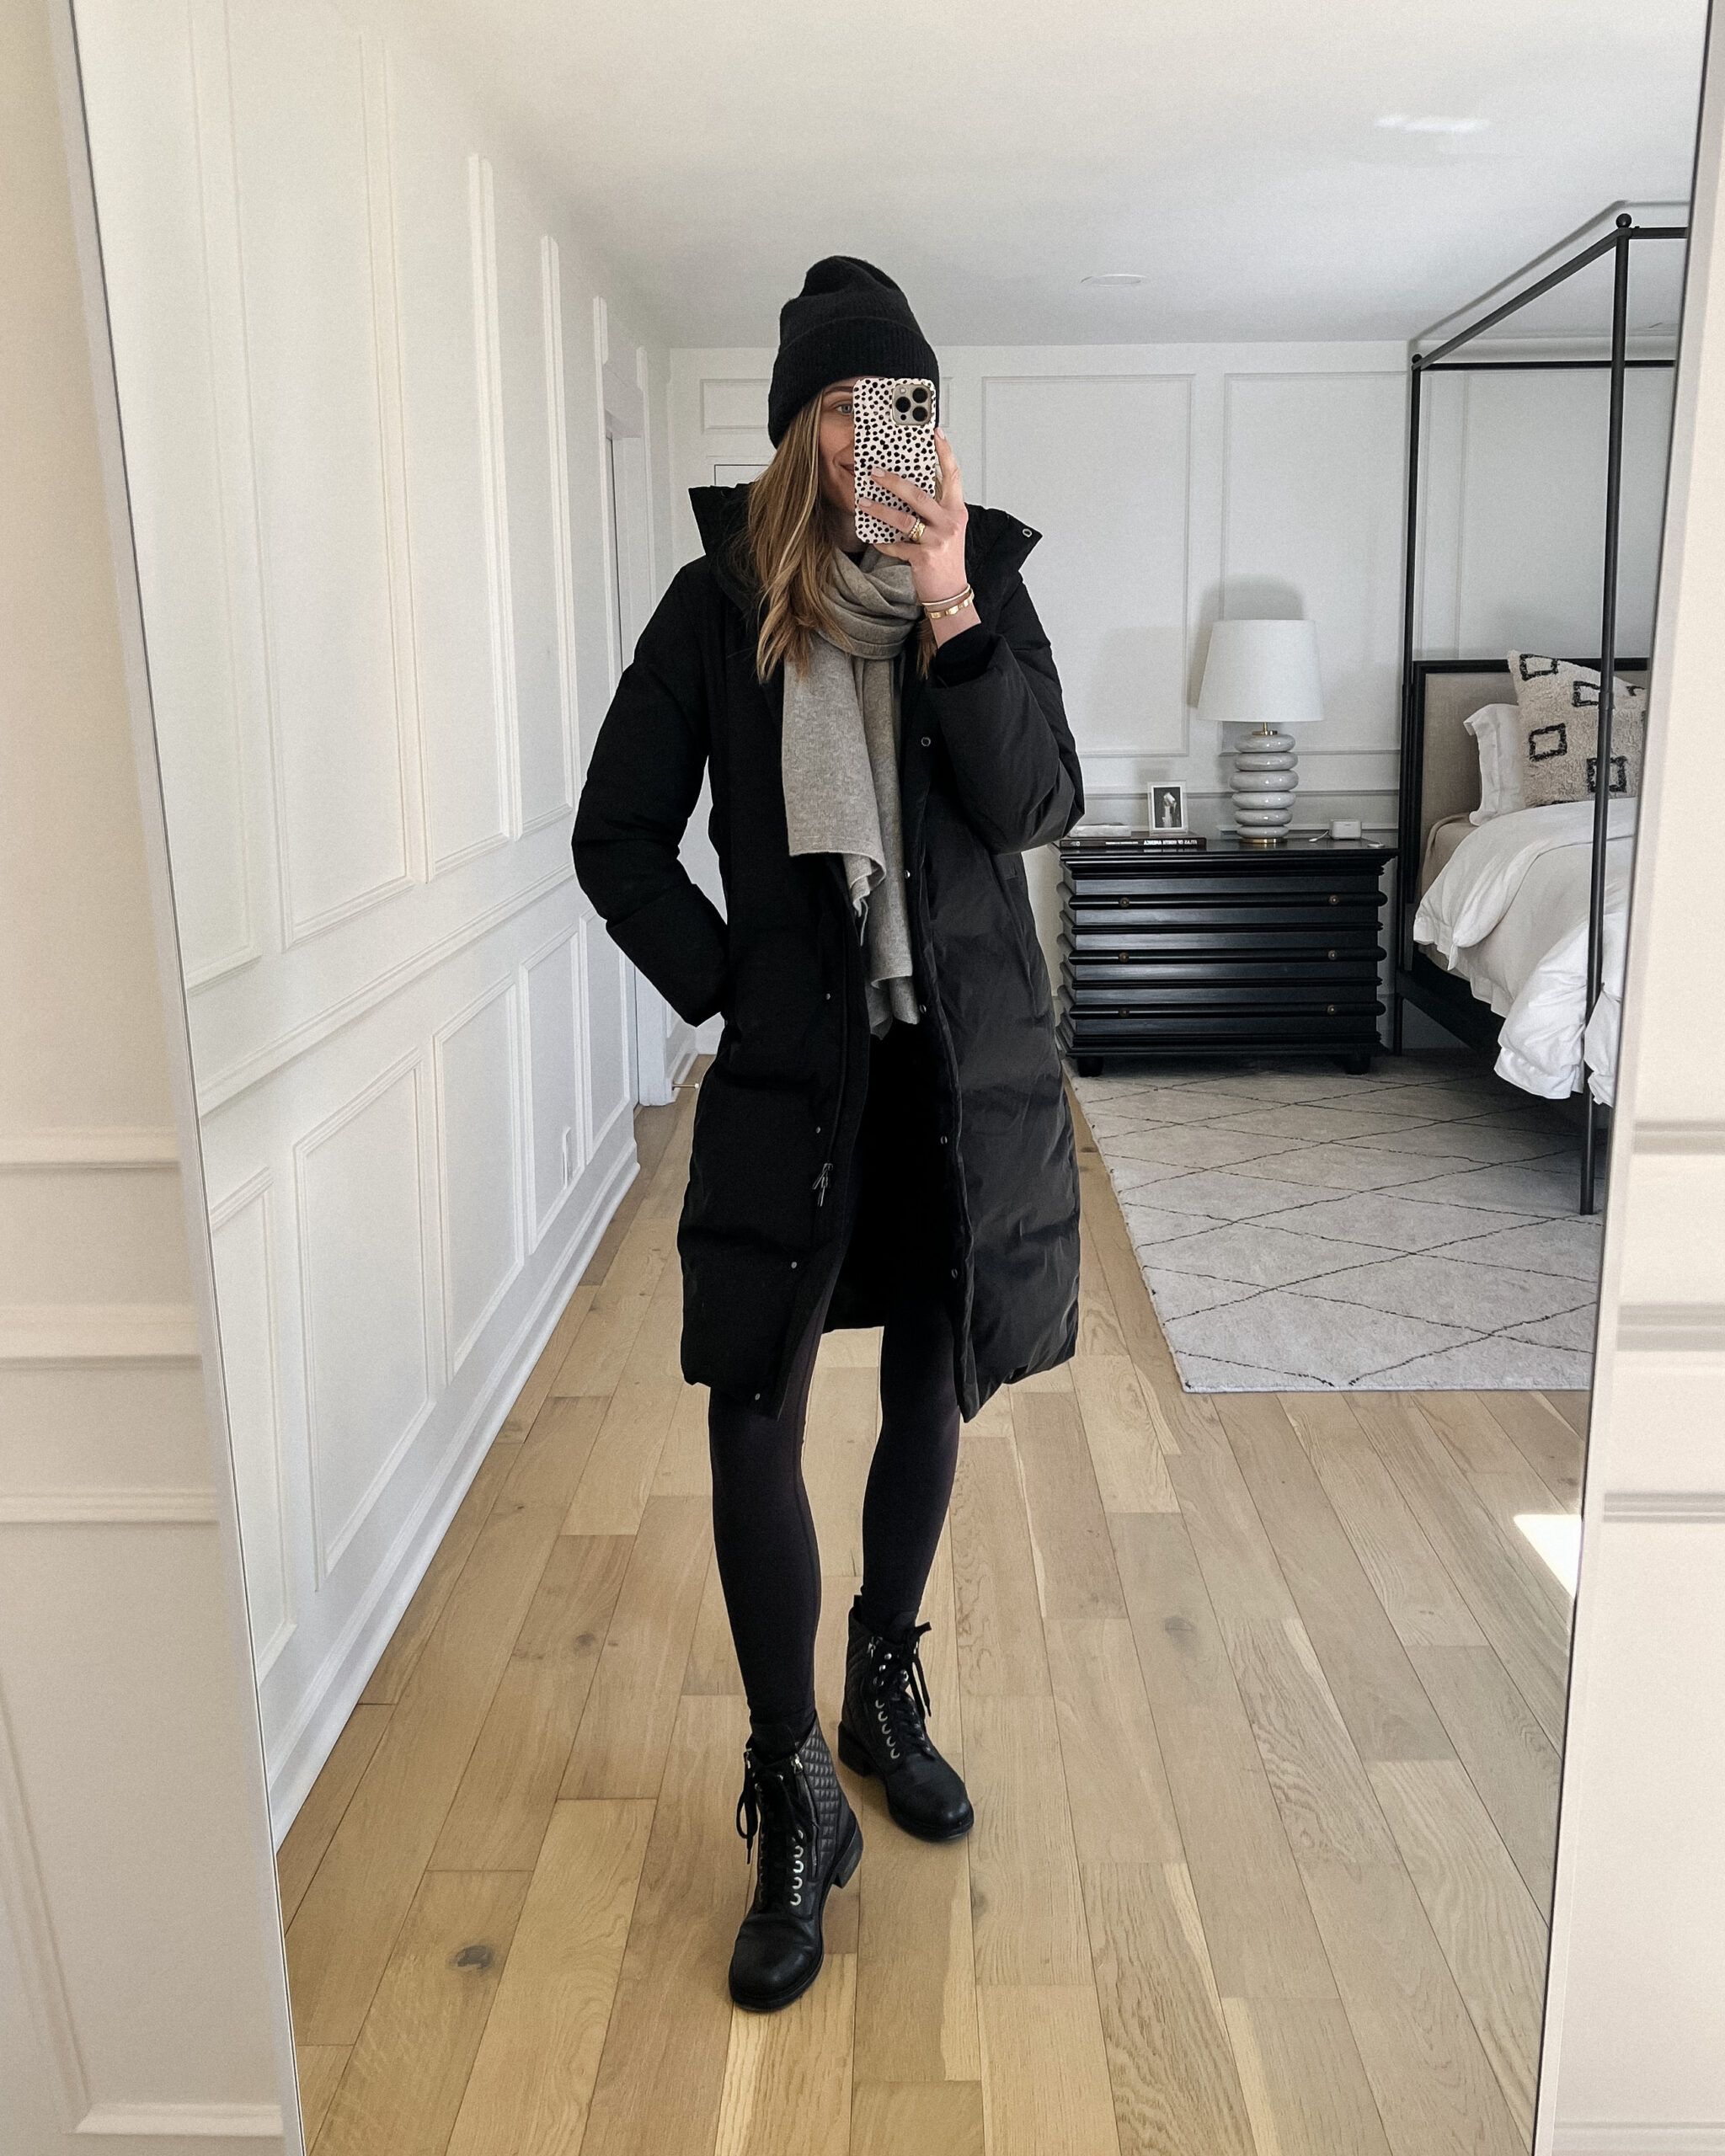 How to Wear Black Parka Jacket: Top 13 Stylish Outfit Ideas for Women